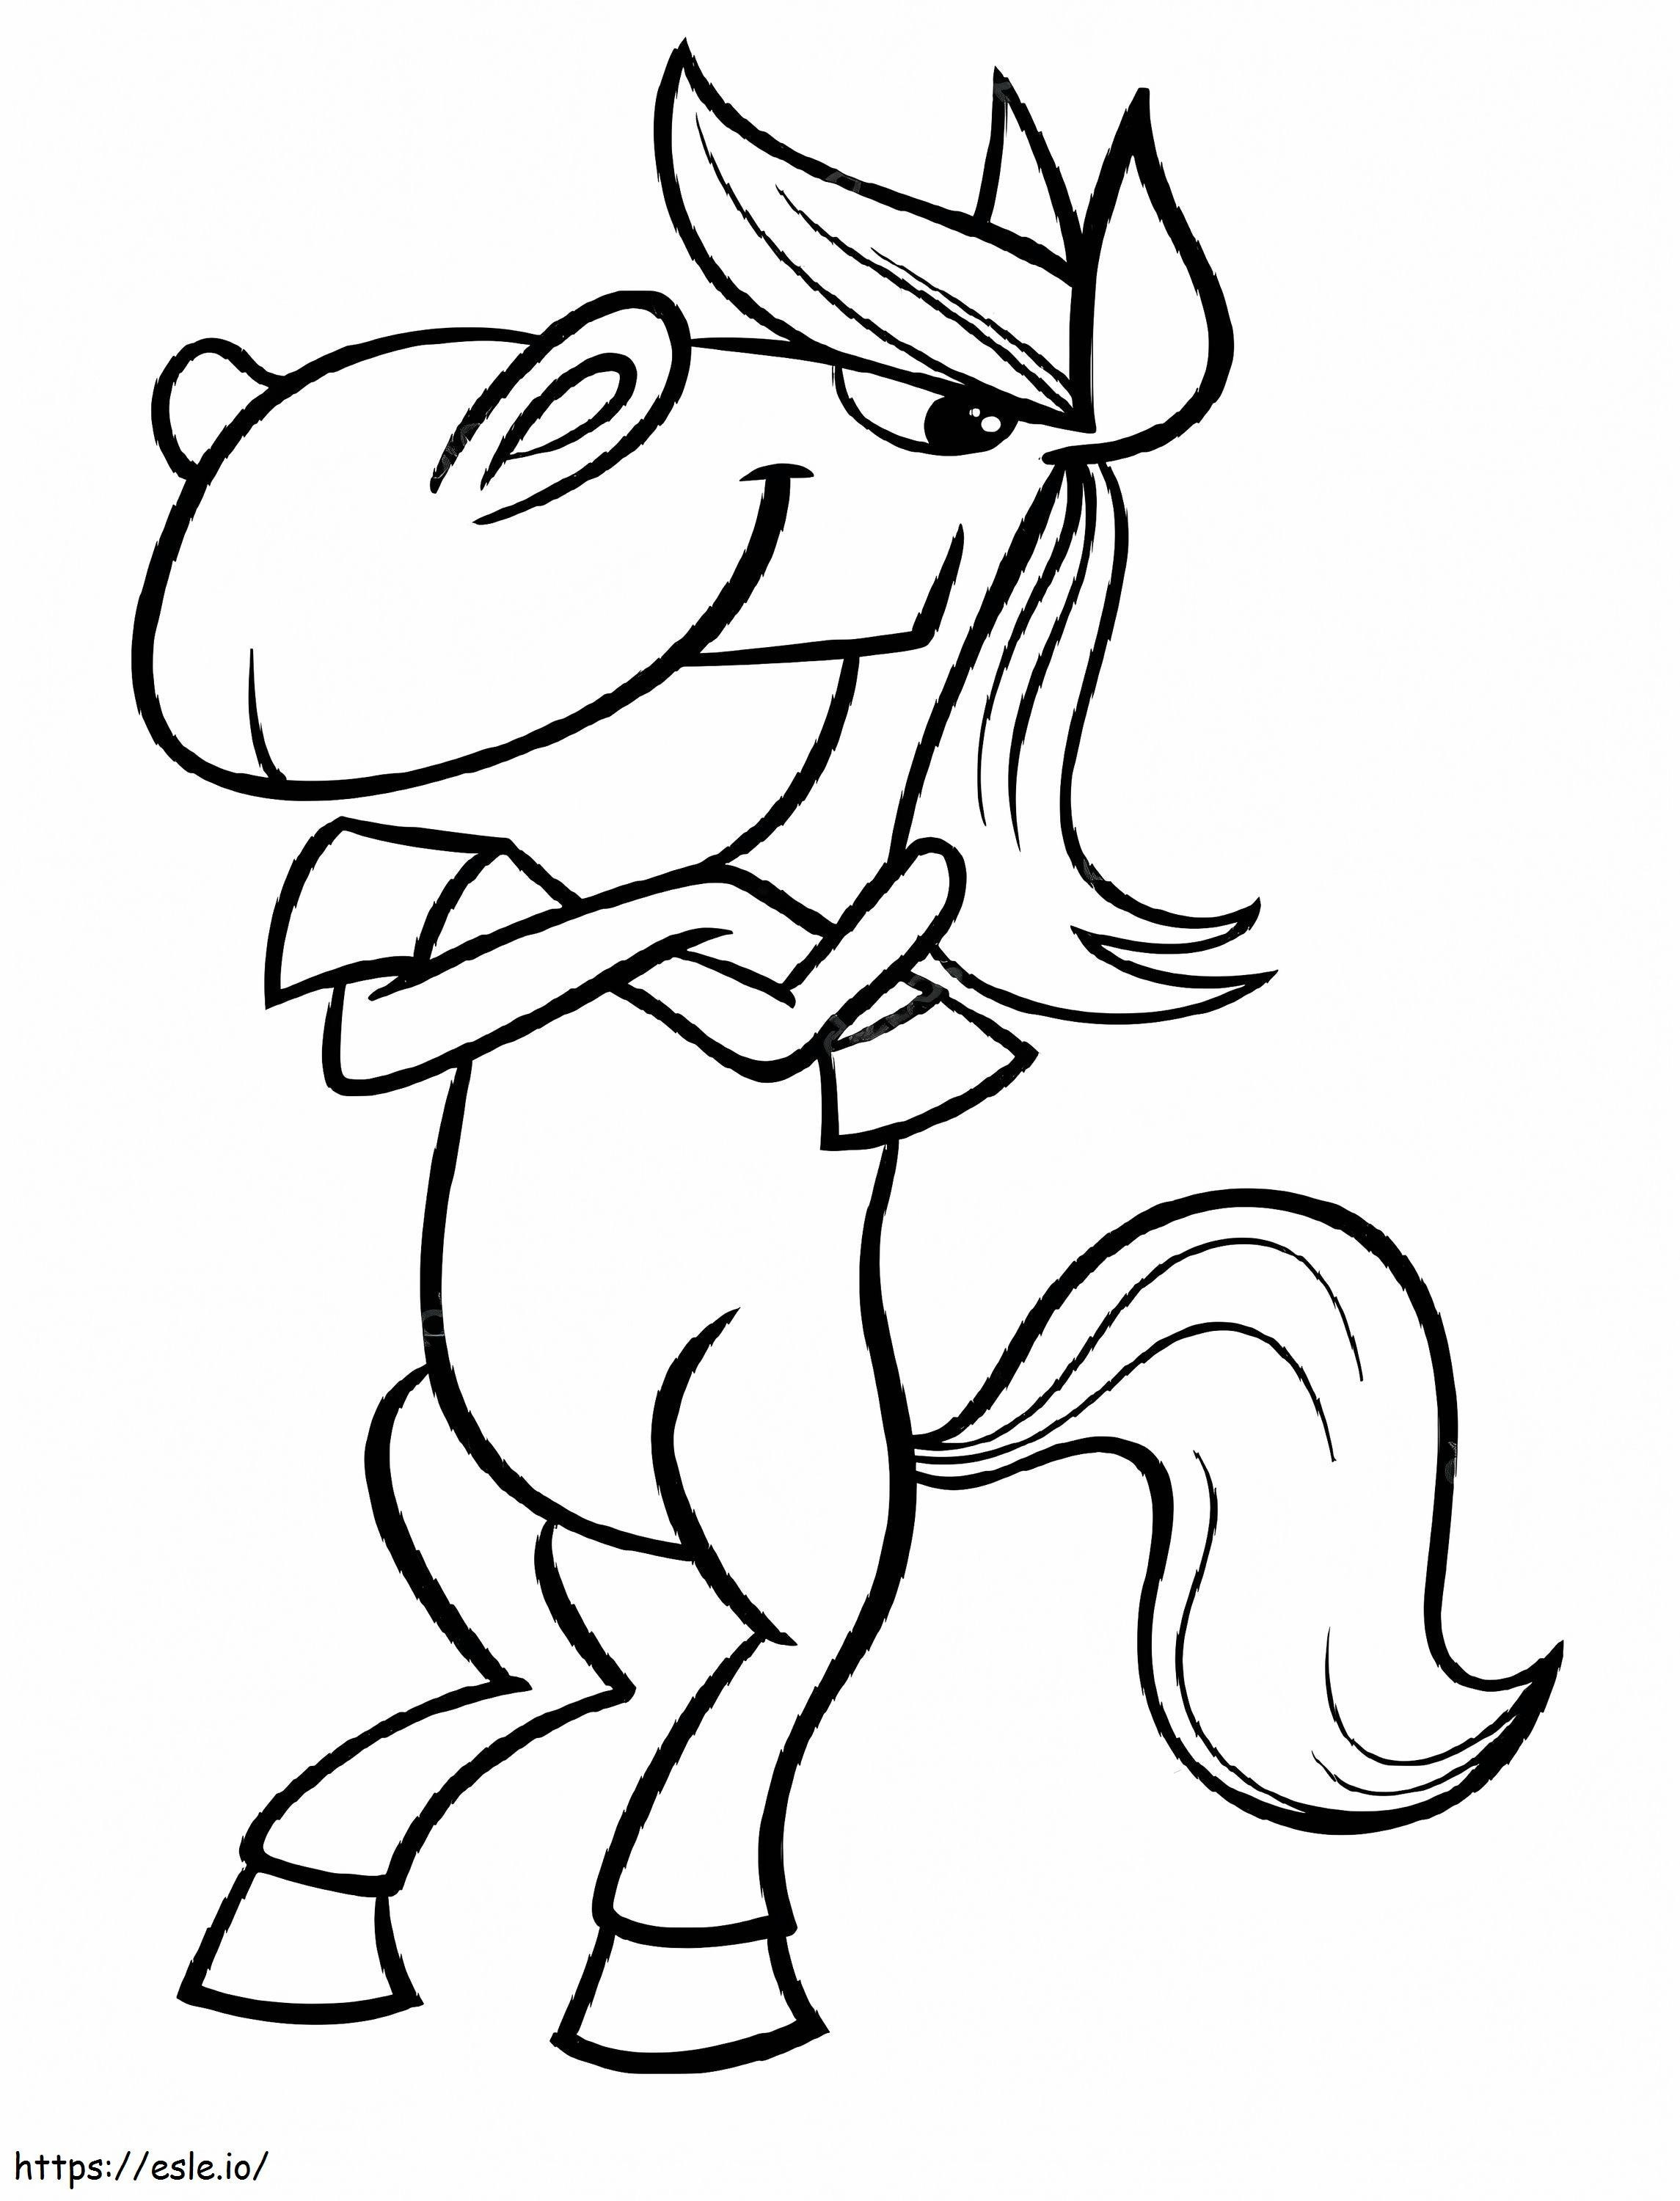 1570784328_Funny Christmas Funny Black And White Cartoon Illustration Of Funny Horse Farm Animal For Coloring Book Funny Christmas Coloring Sheets coloring page